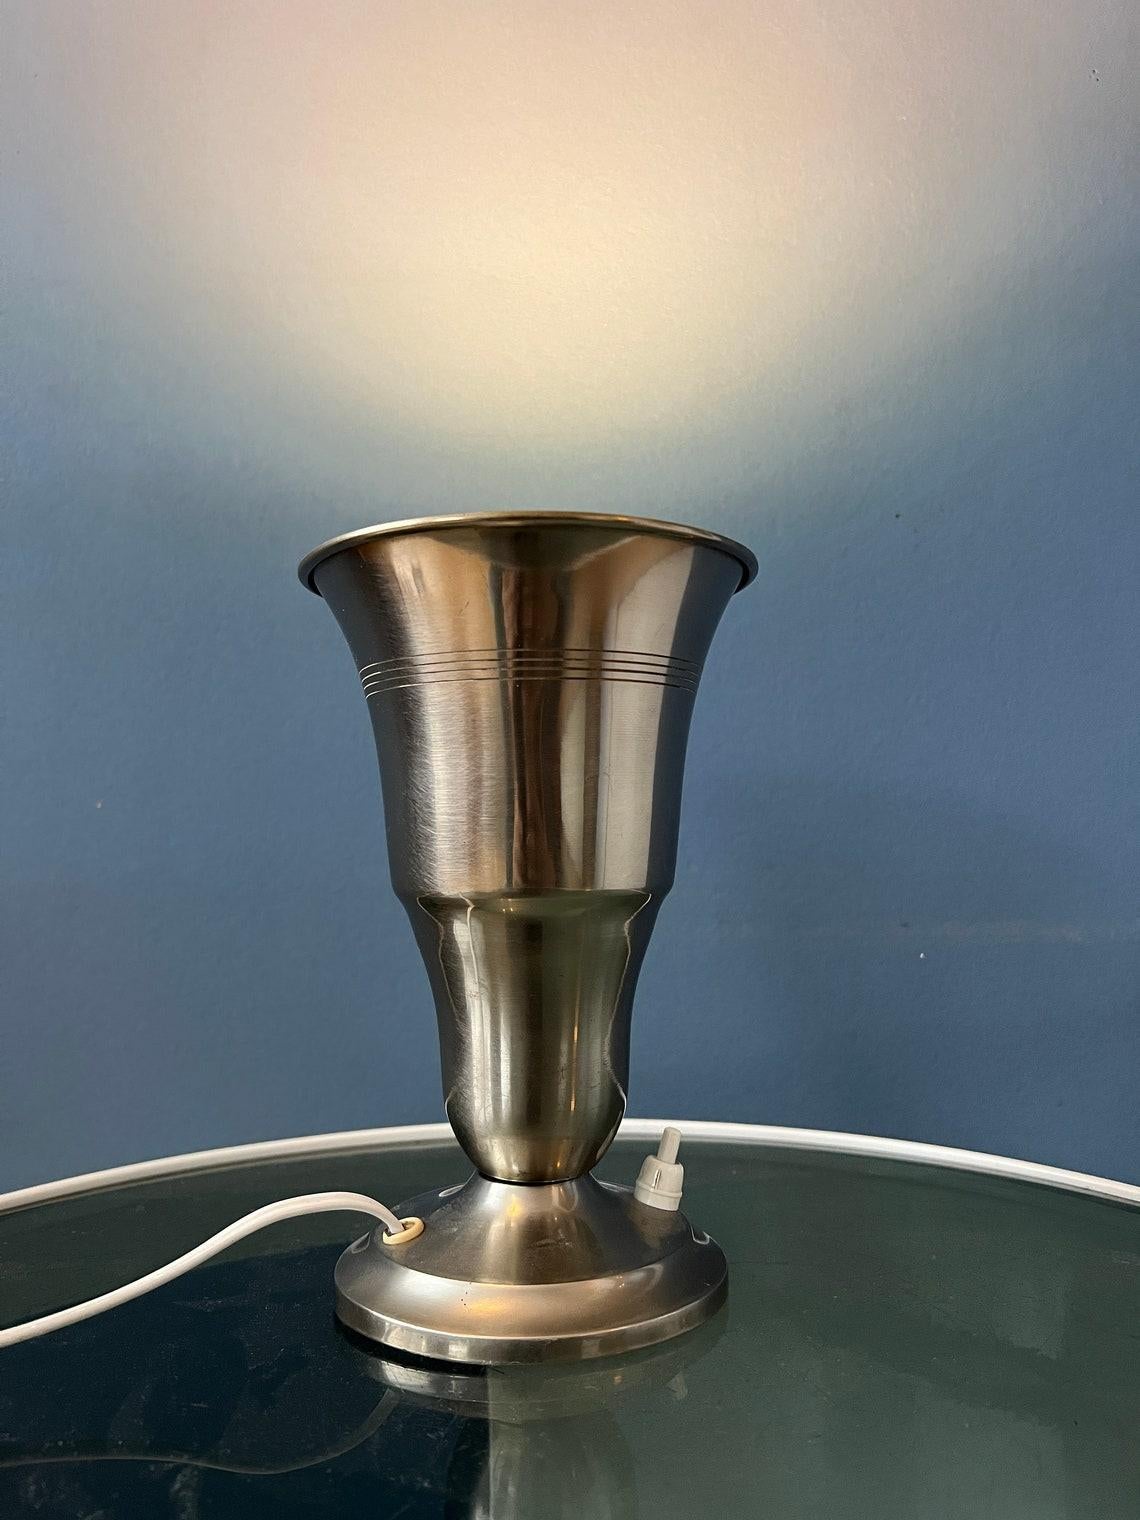 Metal Trumpet Uplighter 'Cup' Table Lamp in Silver Colour, 1970s For Sale 1